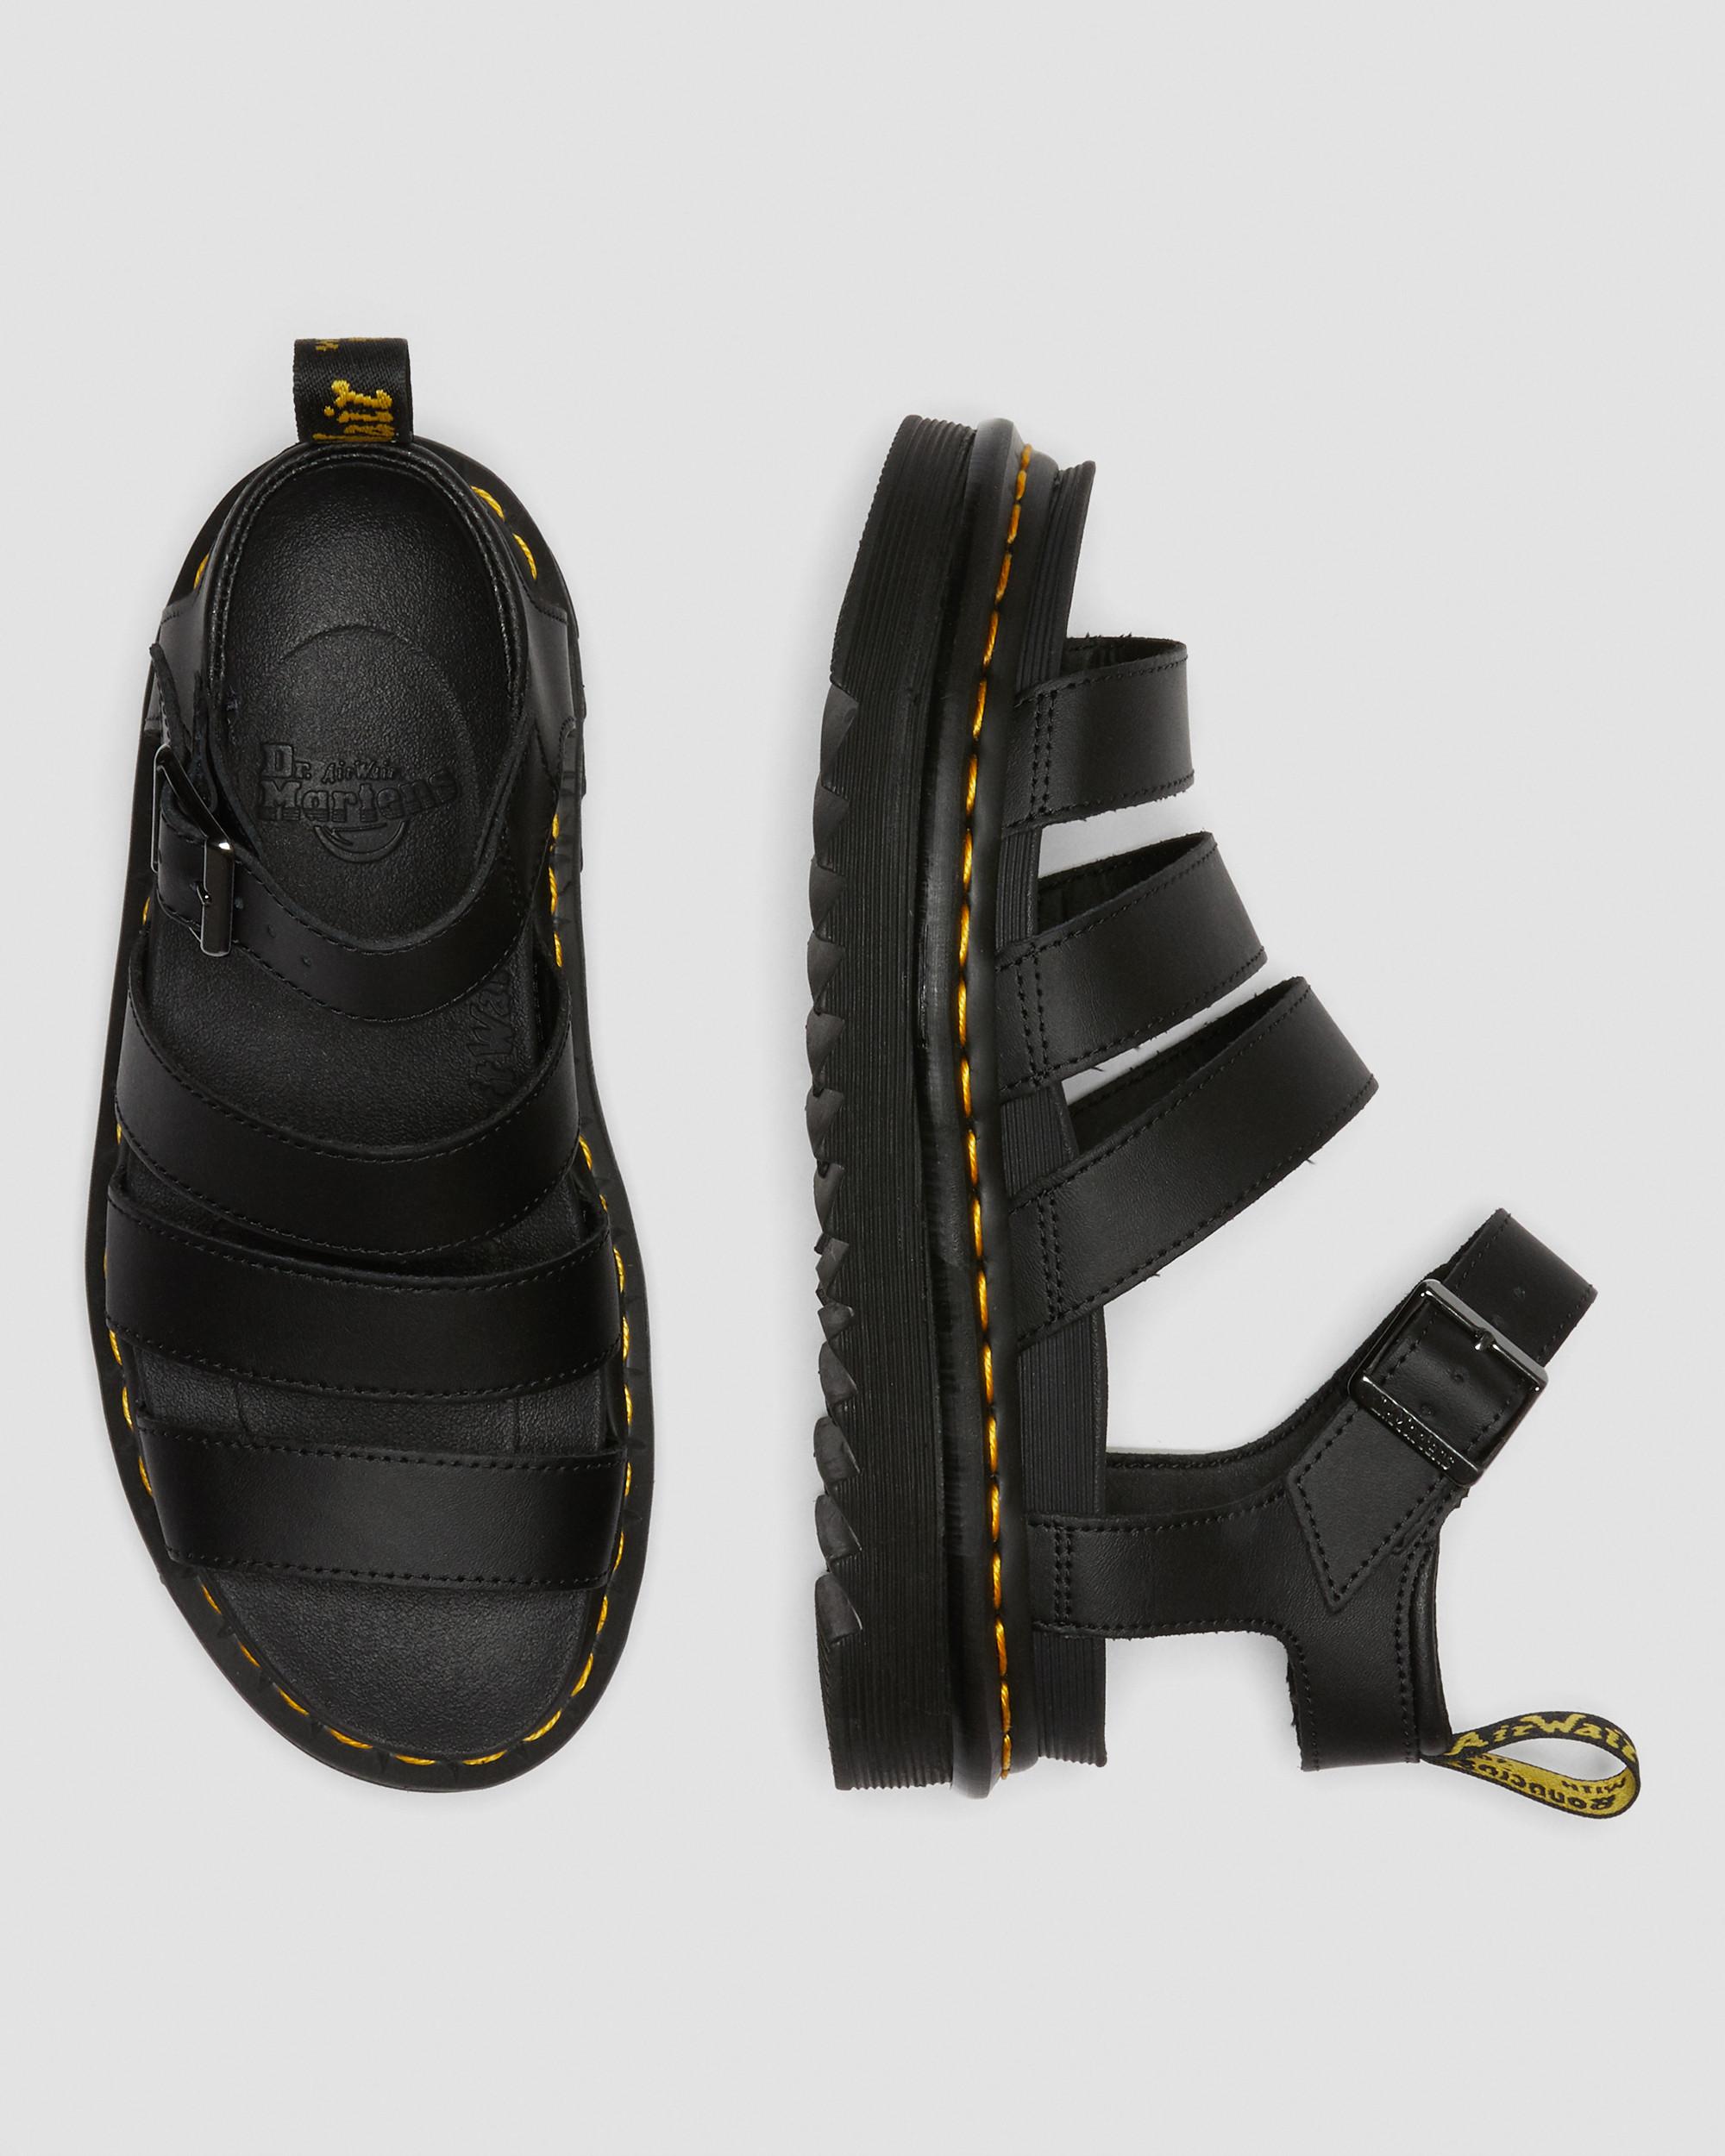 Blaire Hydro Leather Strap Sandals in Black